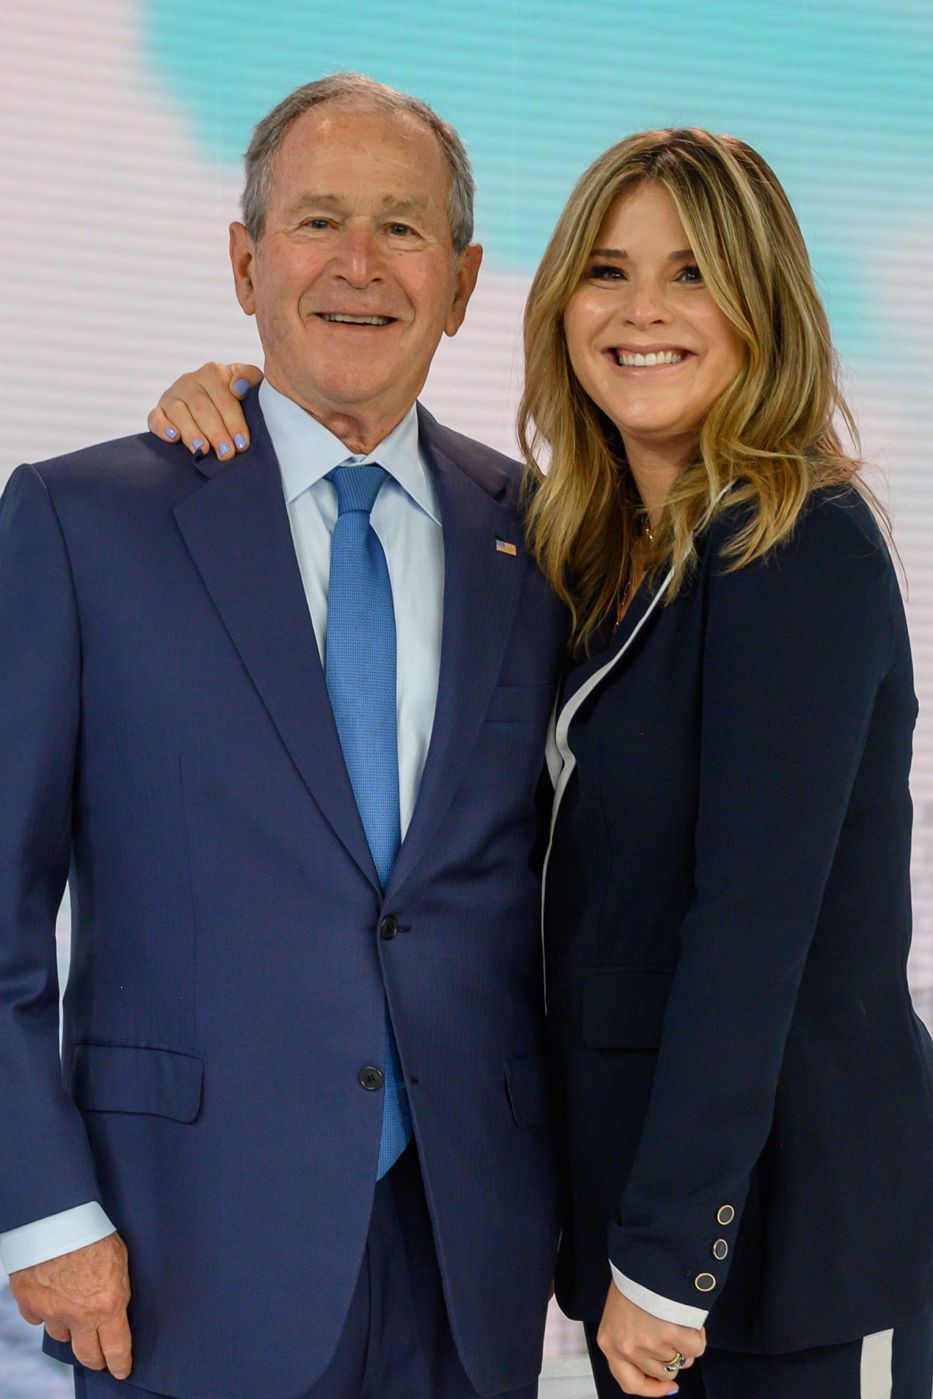 Jenna Bush Hager and George W. Bush on Tuesday, April 20, 2021 at the Today Show